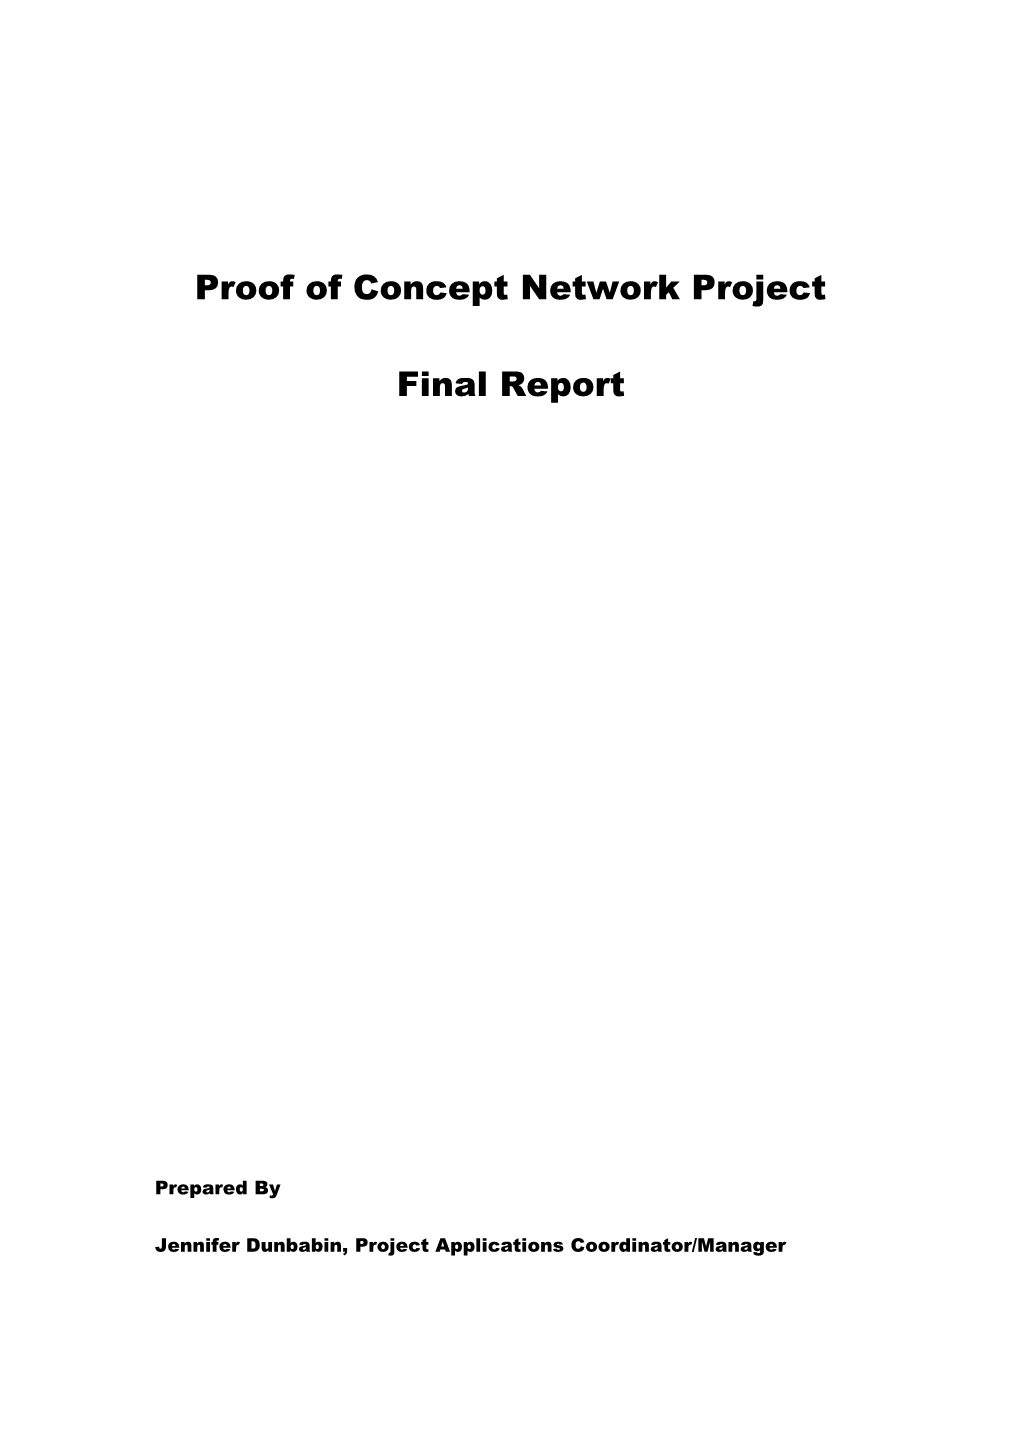 Proof of Concept Network Project